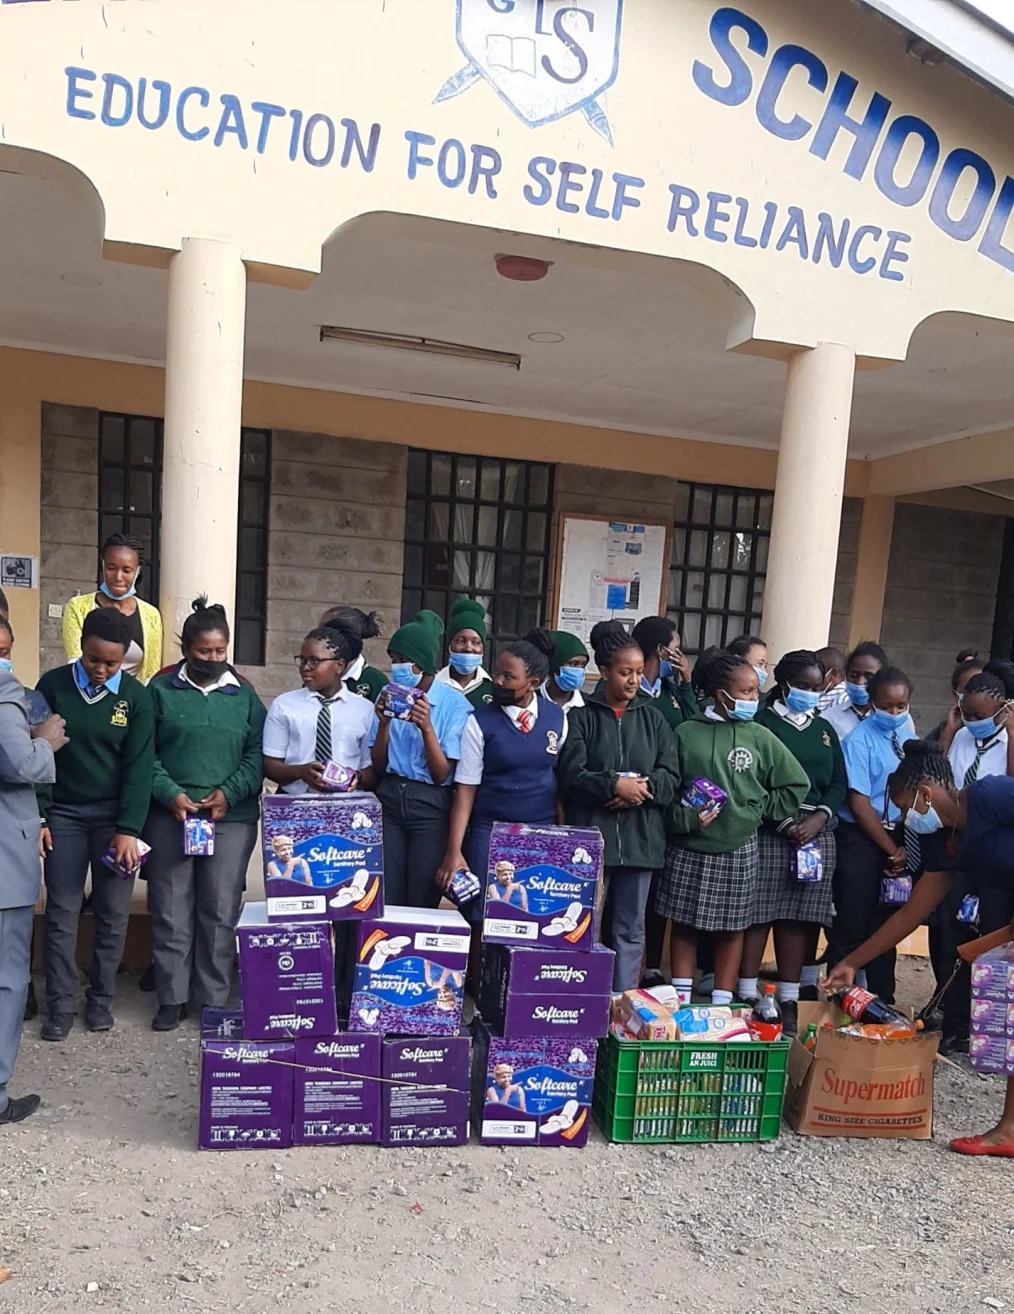 A group of students gather with supplies in front of their school.